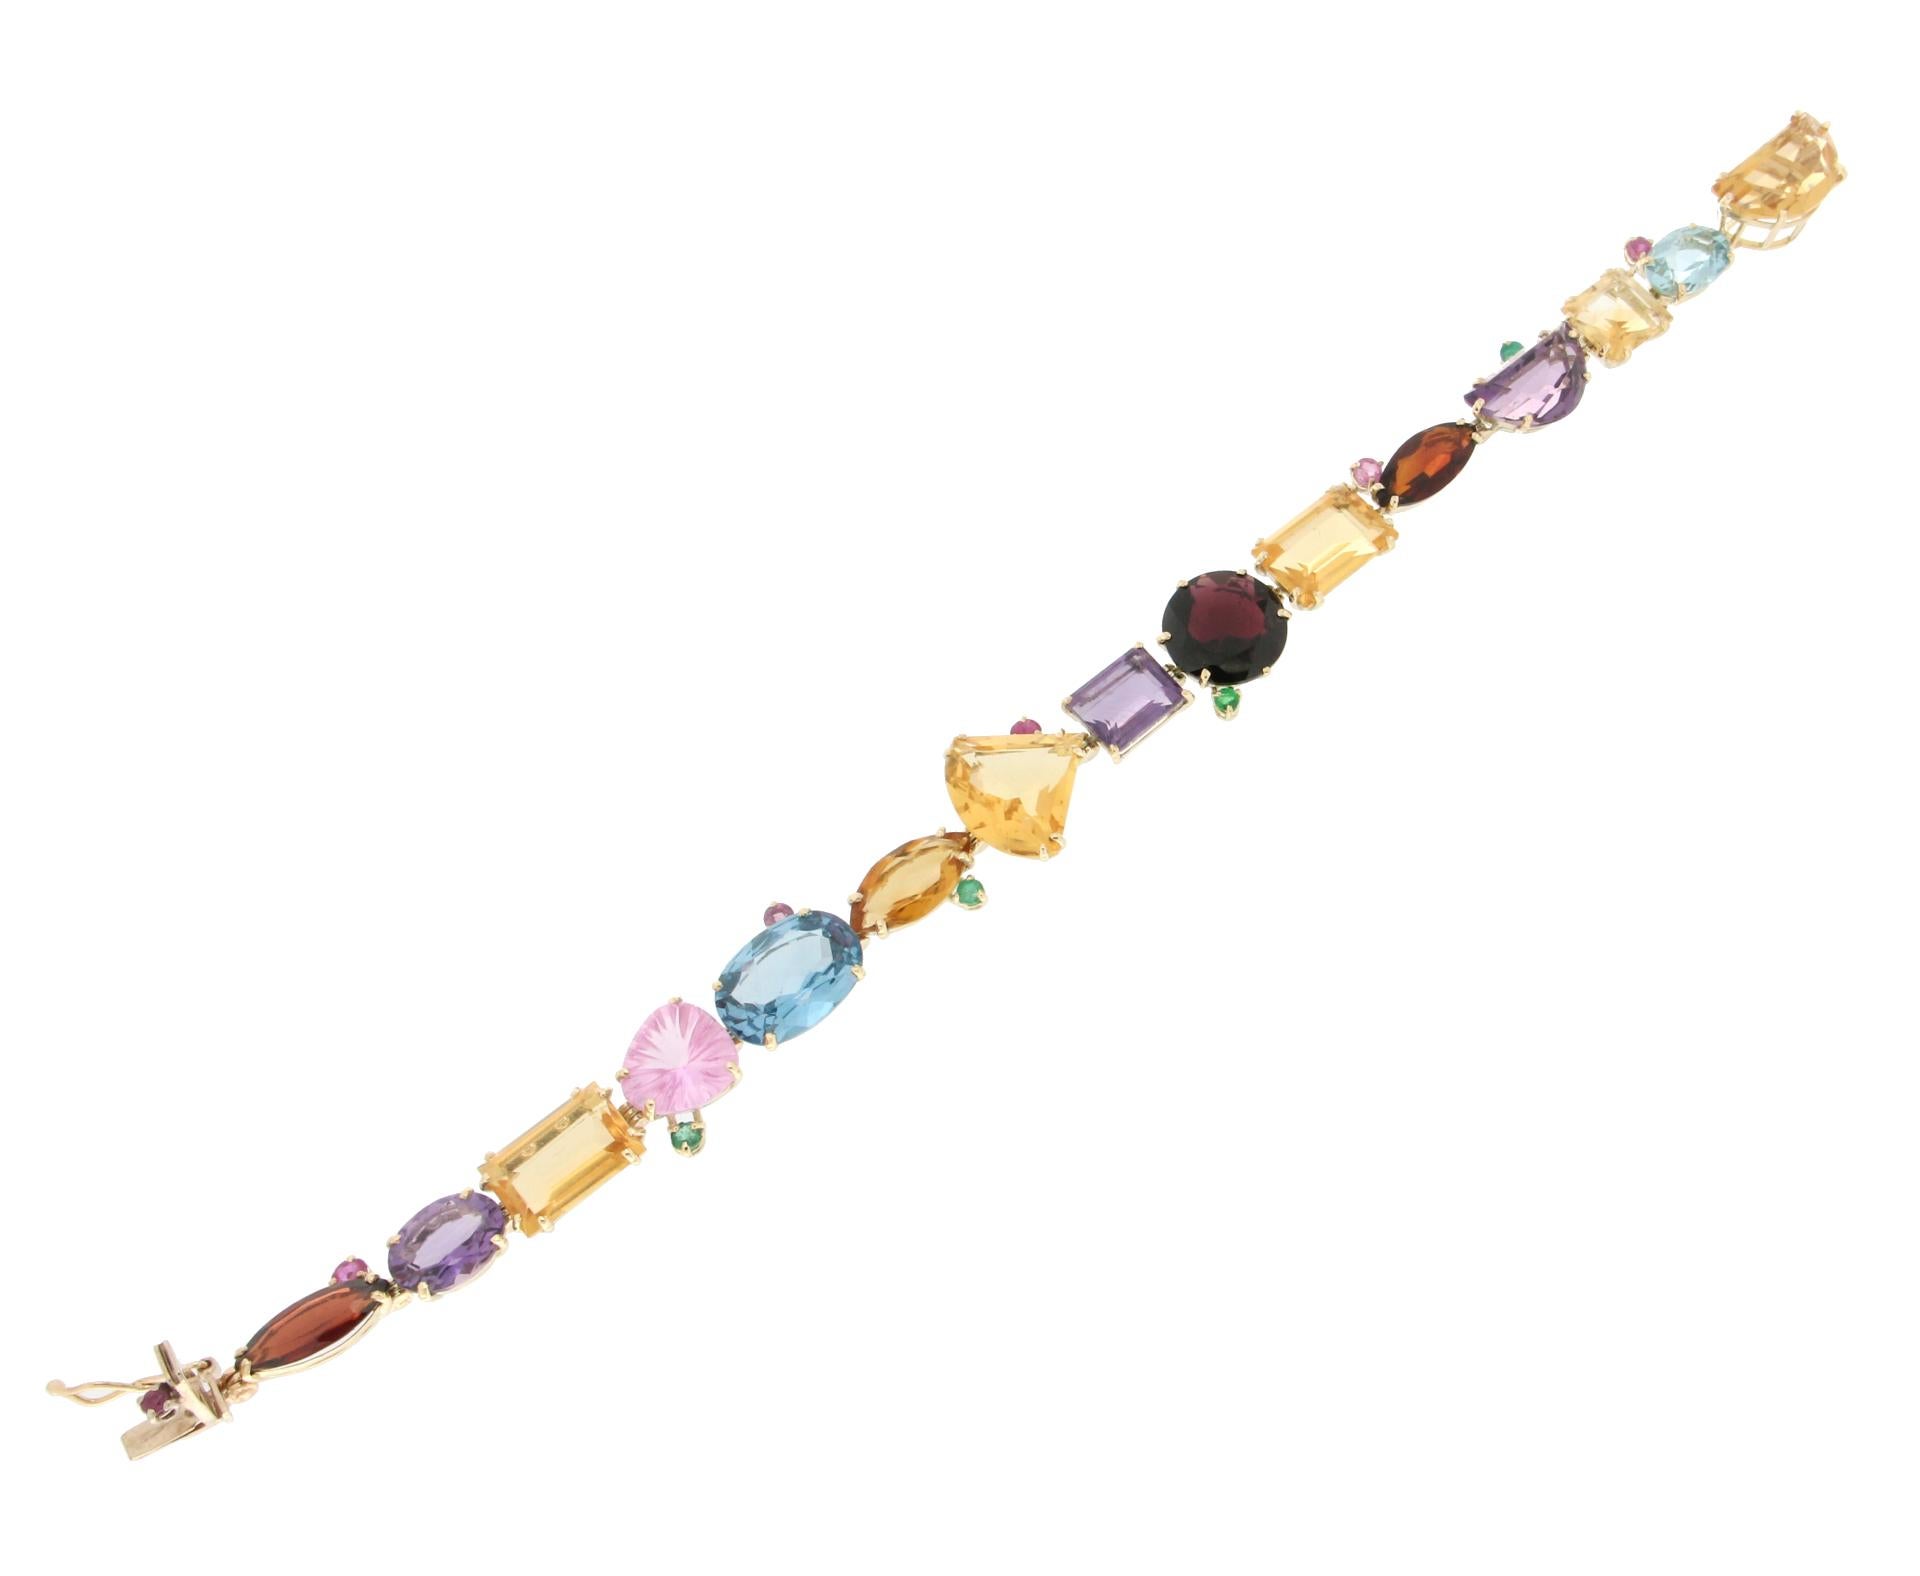 Magnificent bracelet made entirely by hand by our expert craftsmen in 14 Carat yellow gold composed of gems of various types of cut. Amethysts and garnet citrines, while emeralds and rubies surround it.

The bracelet has a total weight of 23.10